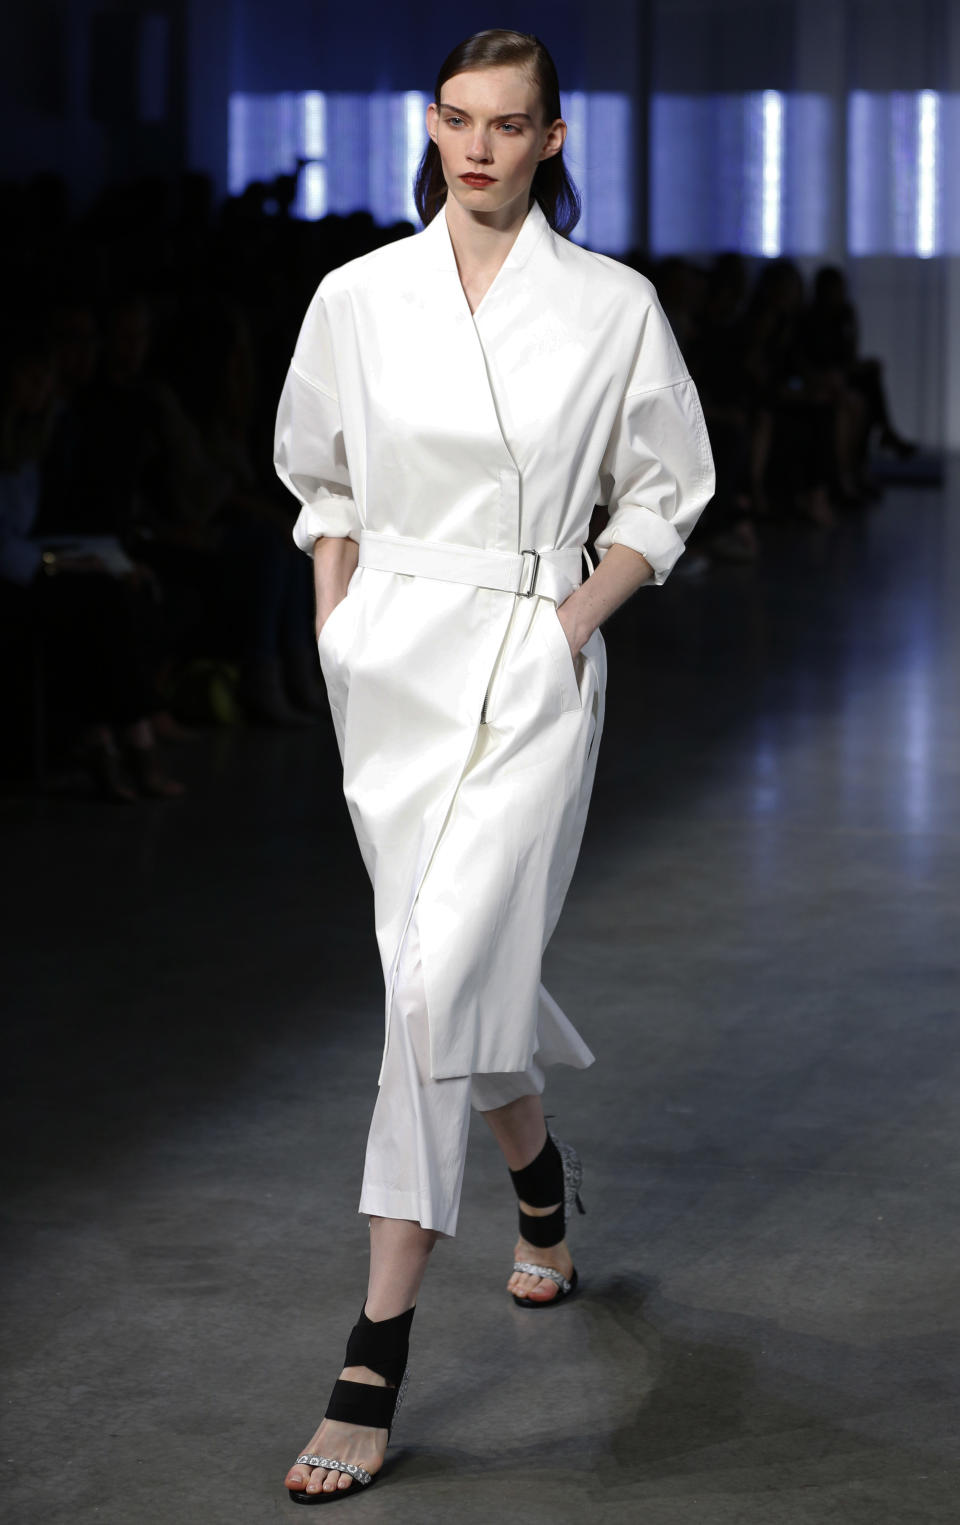 The Helmut Lang Spring 2014 collection is modeled during Fashion Week in New York, Friday, Sept. 6, 2013. (AP Photo/John Minchillo)